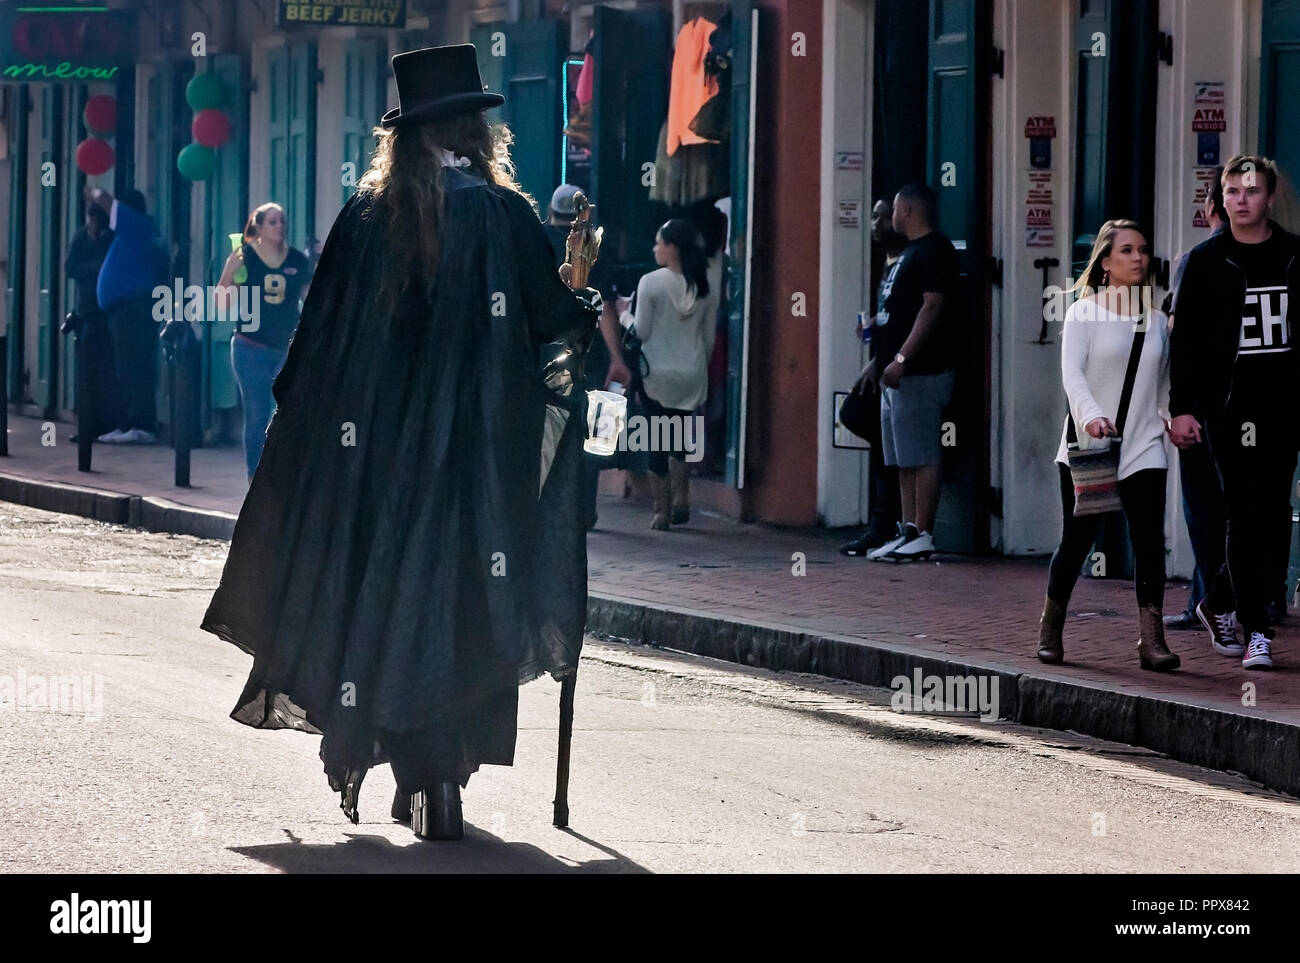 A street performer wearing a black cloak walks through the French Quarter collecting money, Nov. 15, 2015, in New Orleans, Louisiana. (Photo by Carmen Stock Photo